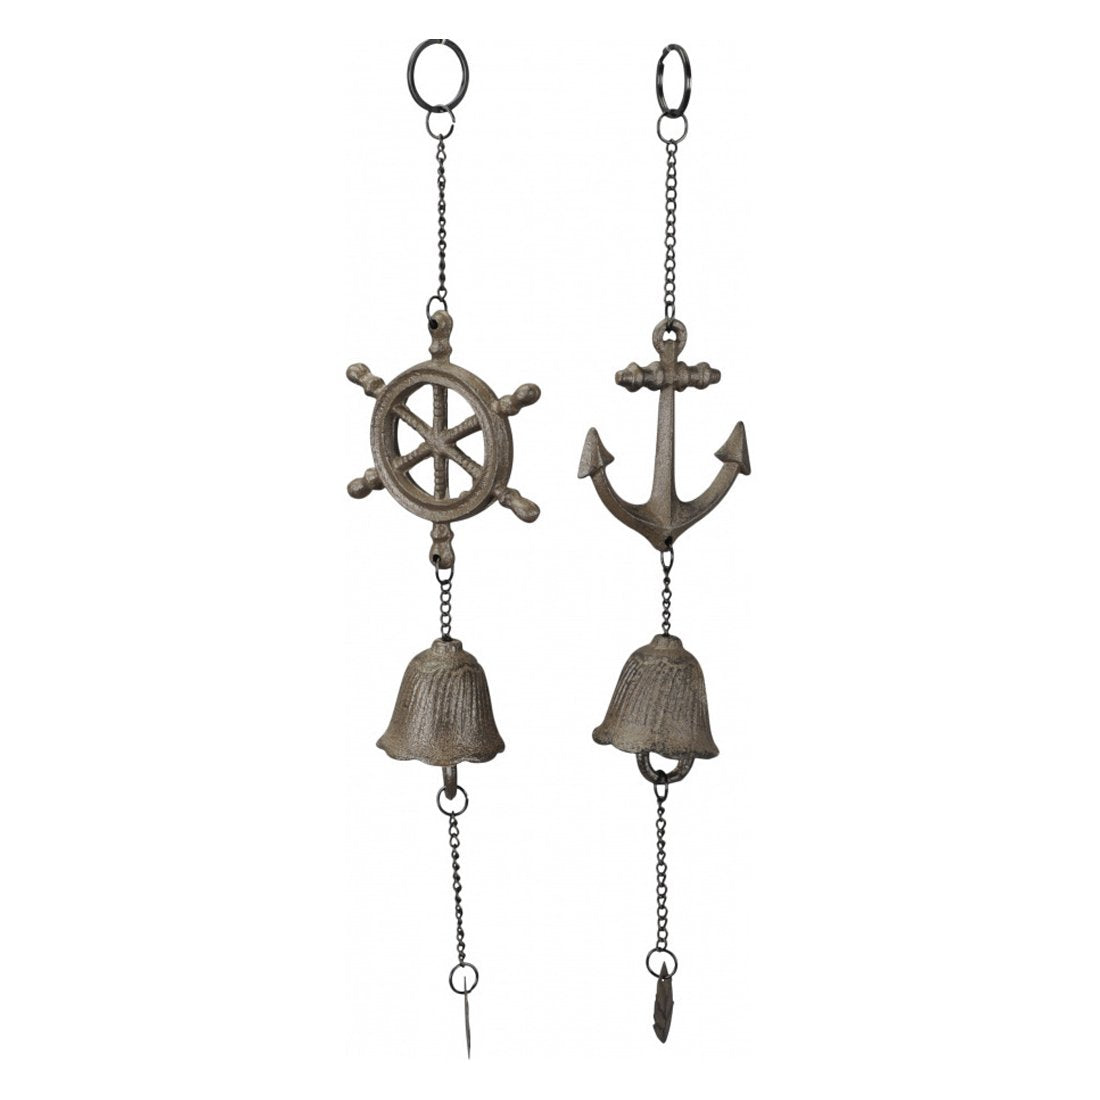 Cast Iron Nautical-Themed Bells (2 Designs) - Anchor | Indoor Outdoors